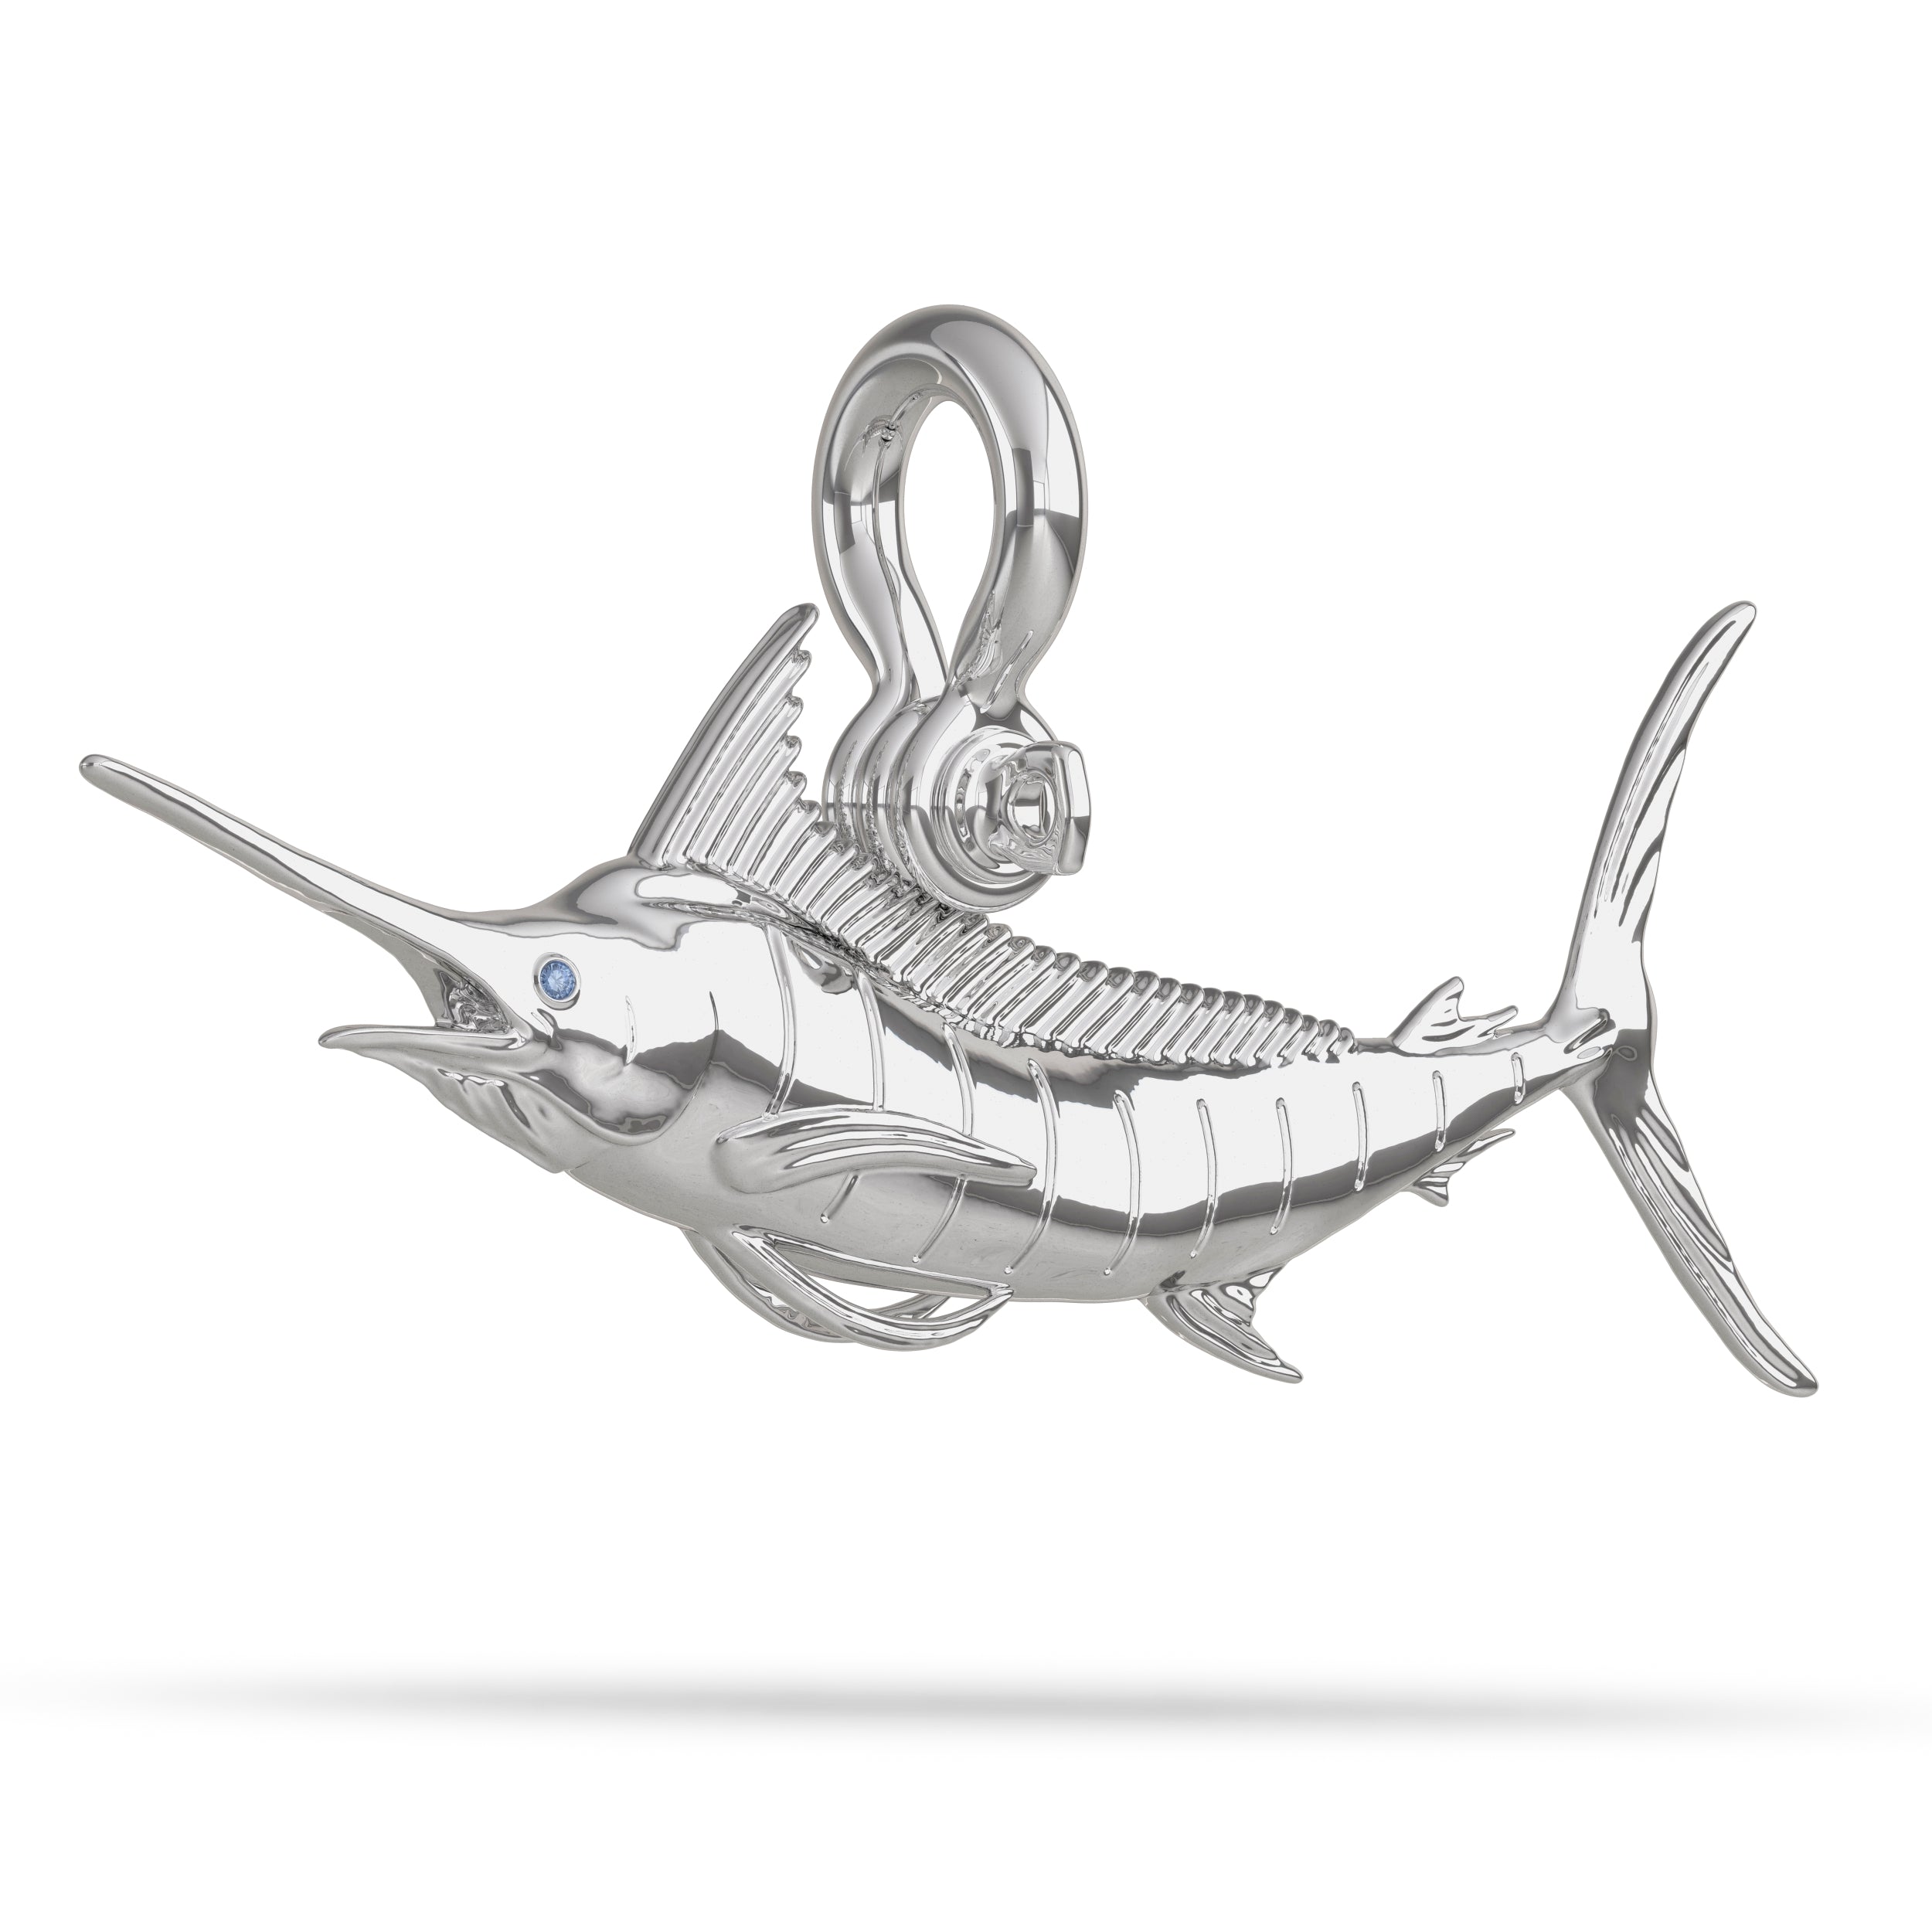 Sterling Silver Pacific Striped Marlin Pendant High Polished Mirror Finish With Blue Sapphire Eye with A Mariner Shackle Bail Custom Designed By Nautical Treasure Jewelry In The Florida Keys 